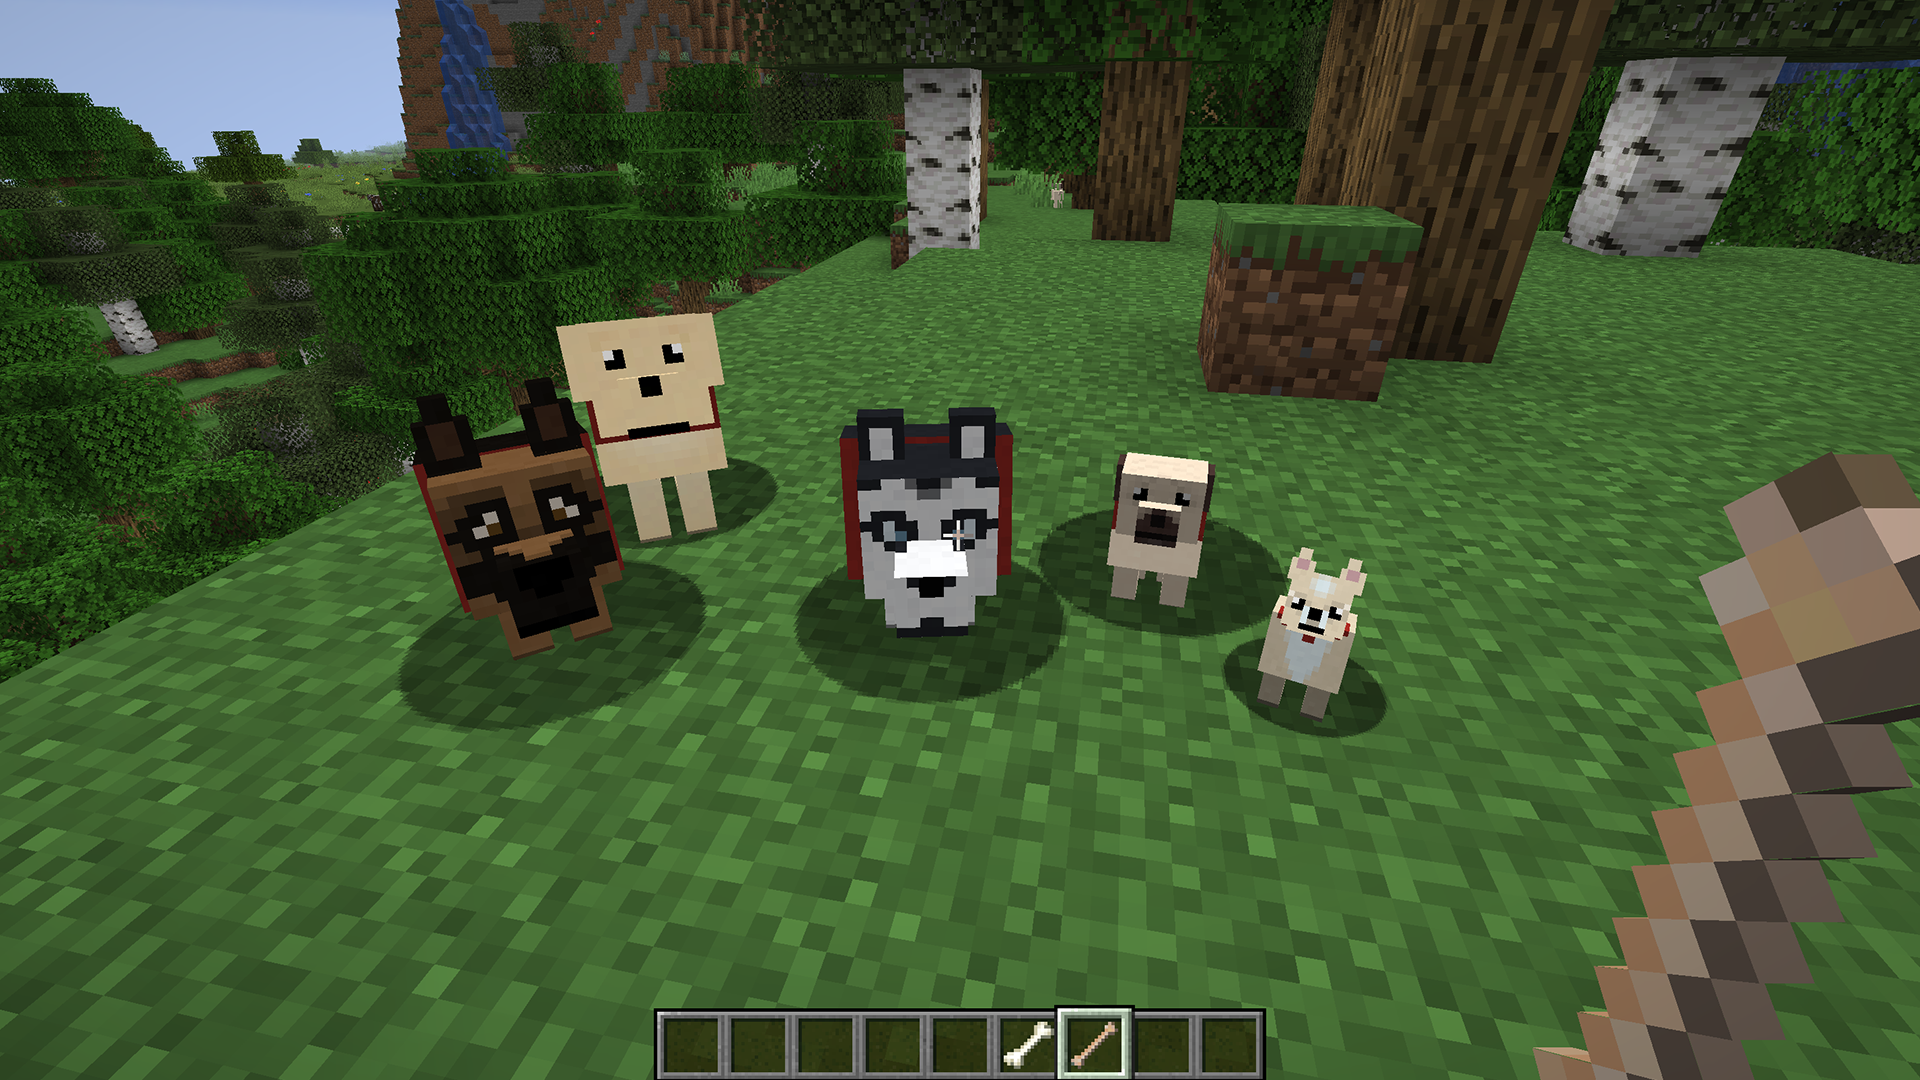 More Dogs (1.15.2) - Minecraft Mod Download